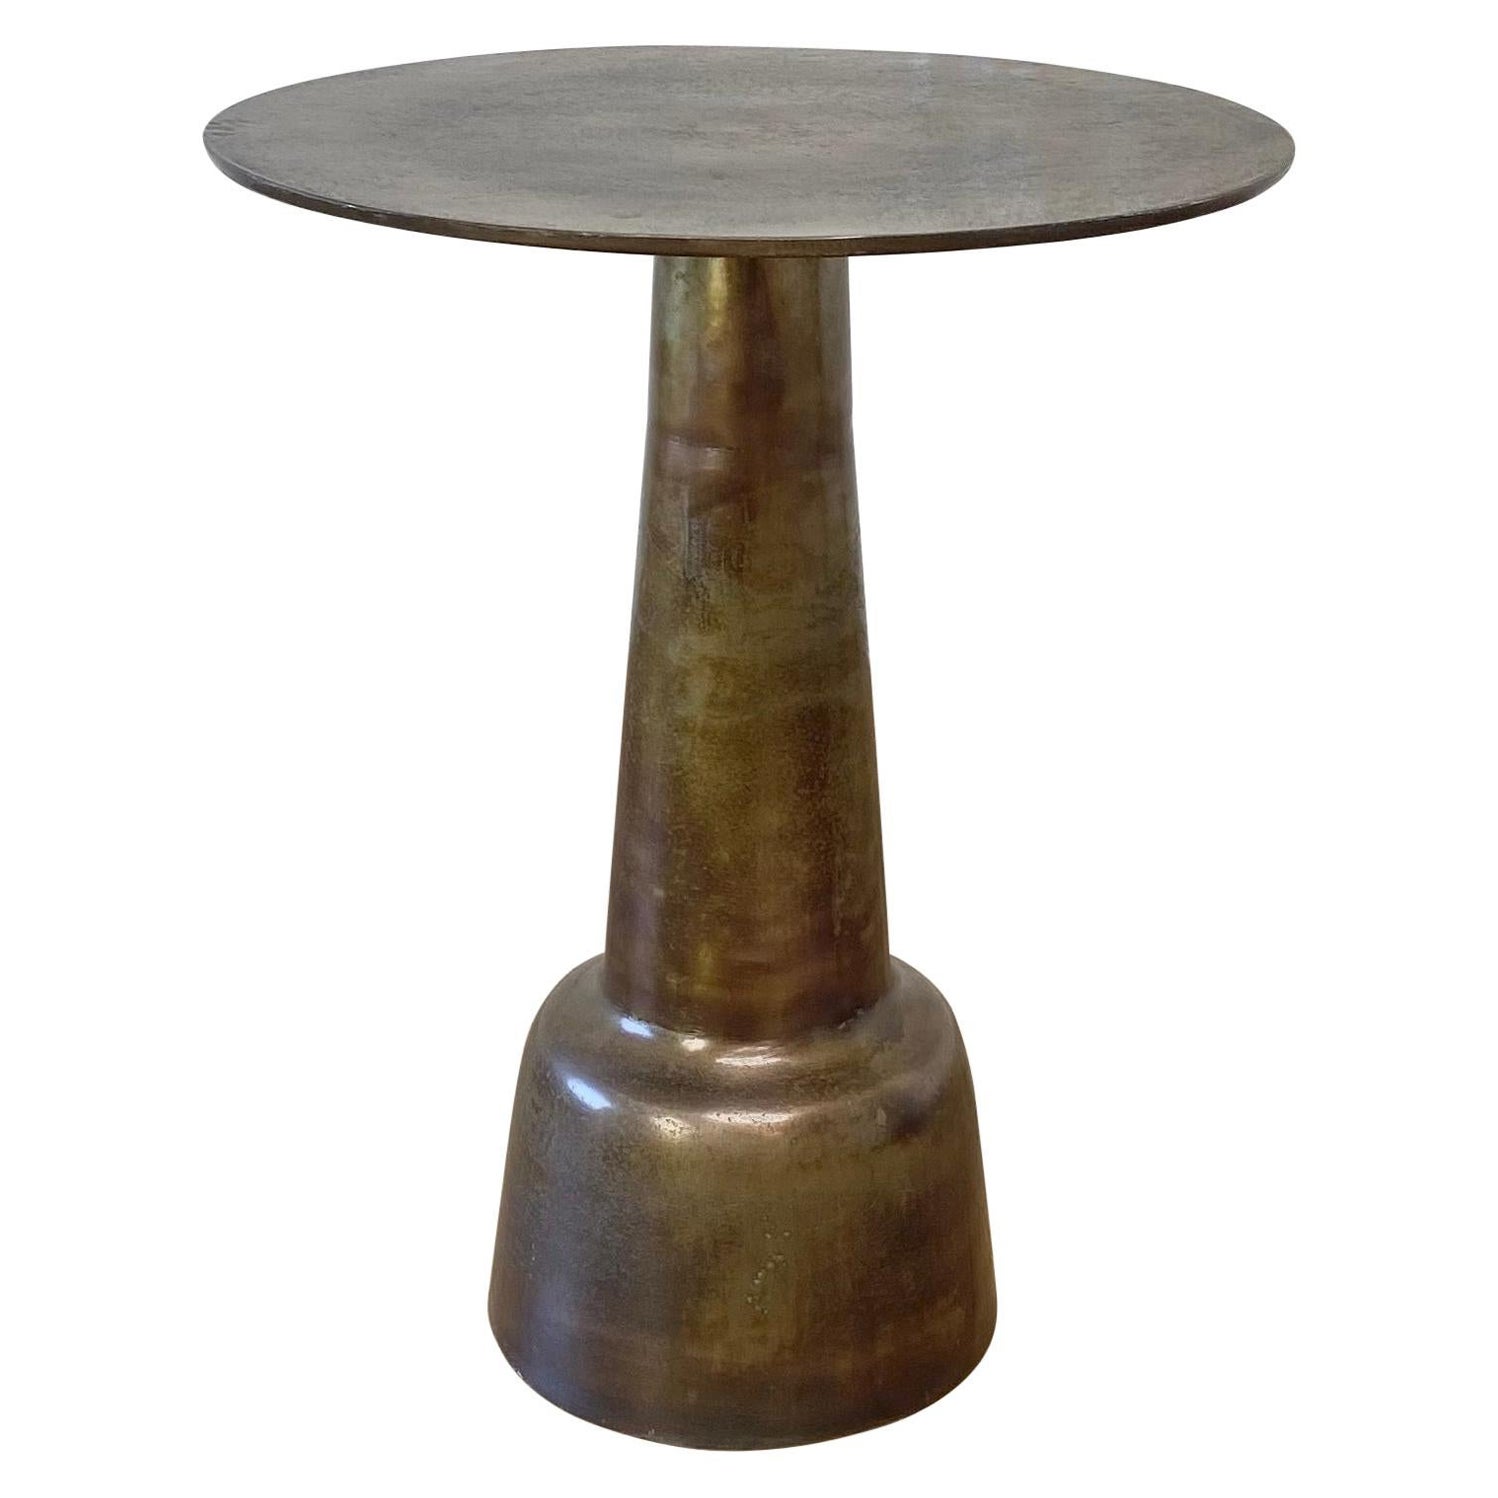 Distressed Metal Side Table with Antique Finish